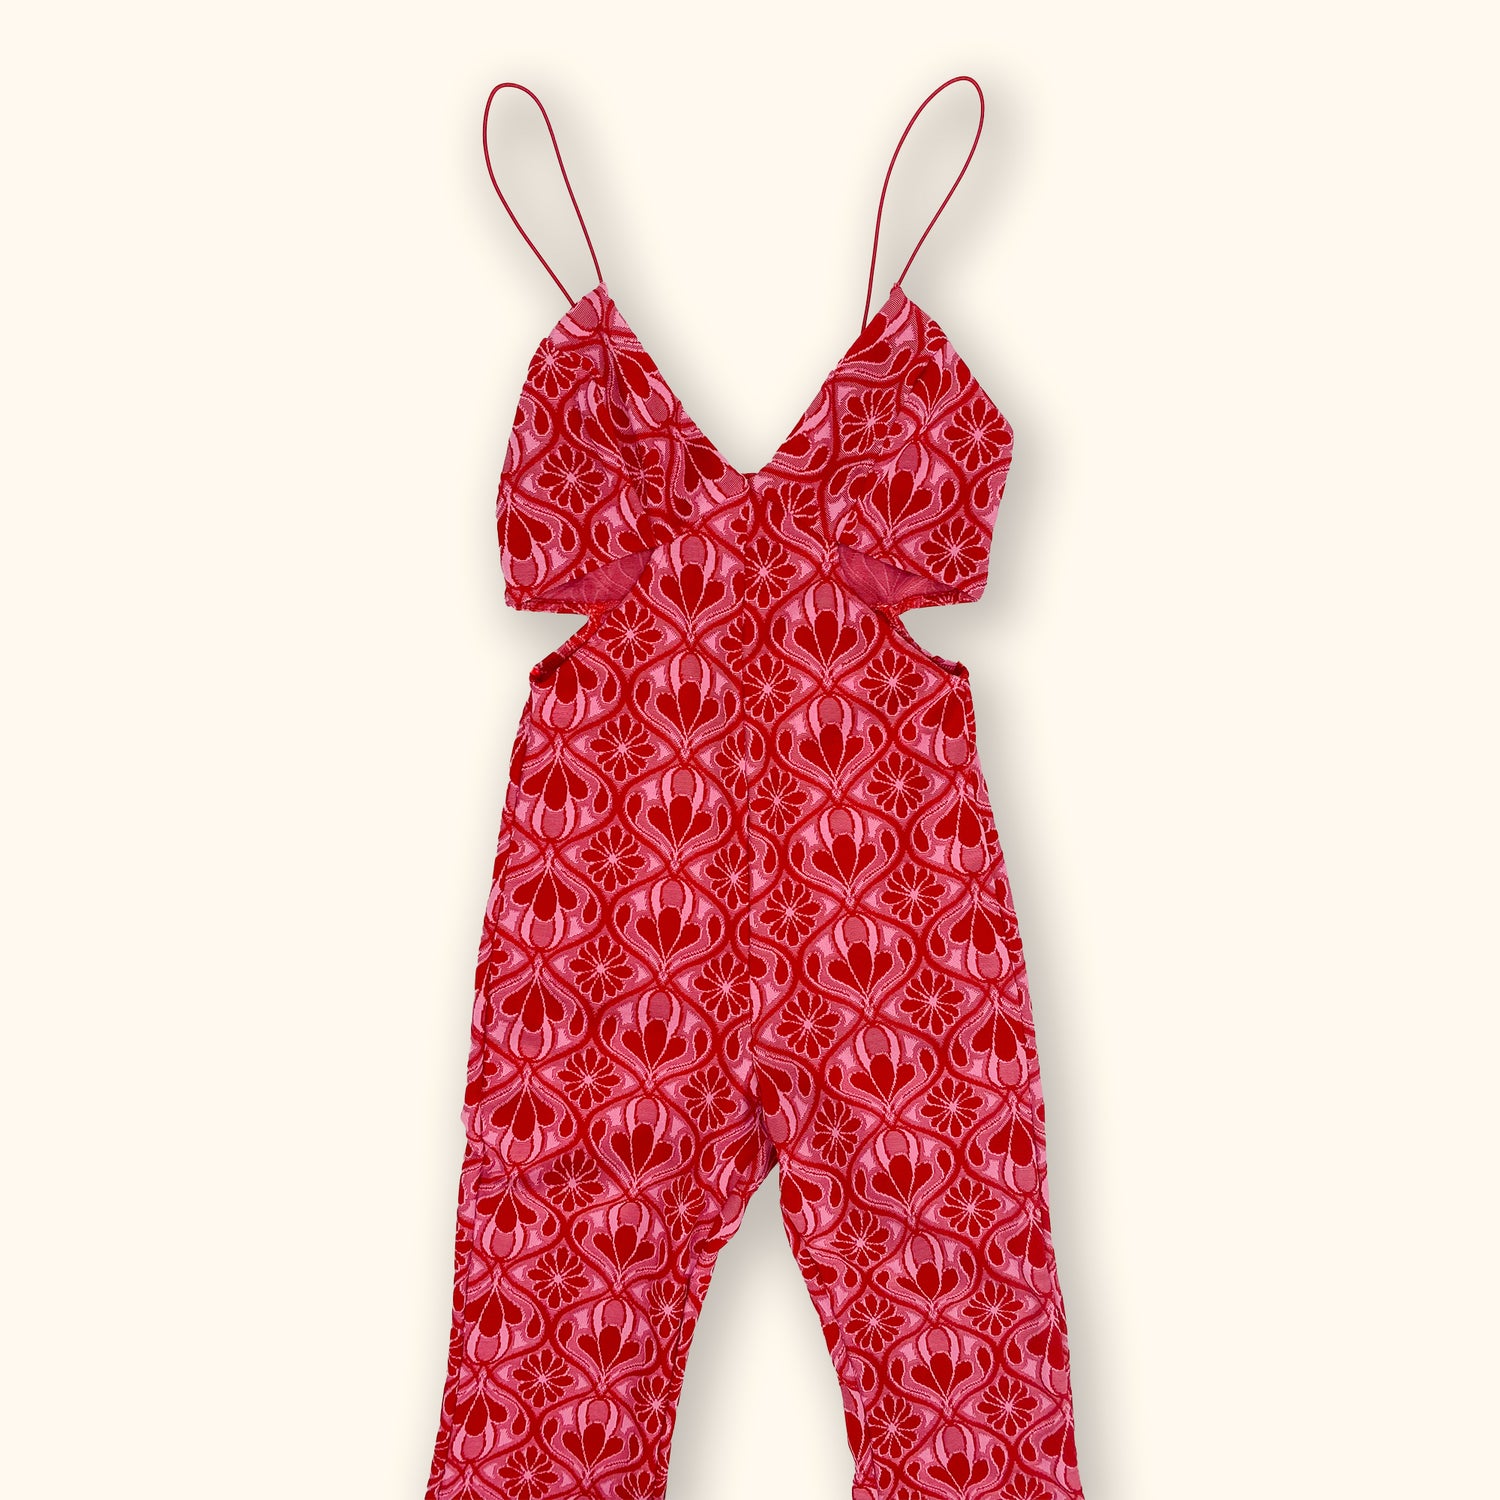 Zara Pink and Red Flower Cut Out Flared Jumpsuit - Size Small - Zara - Jumpsuit